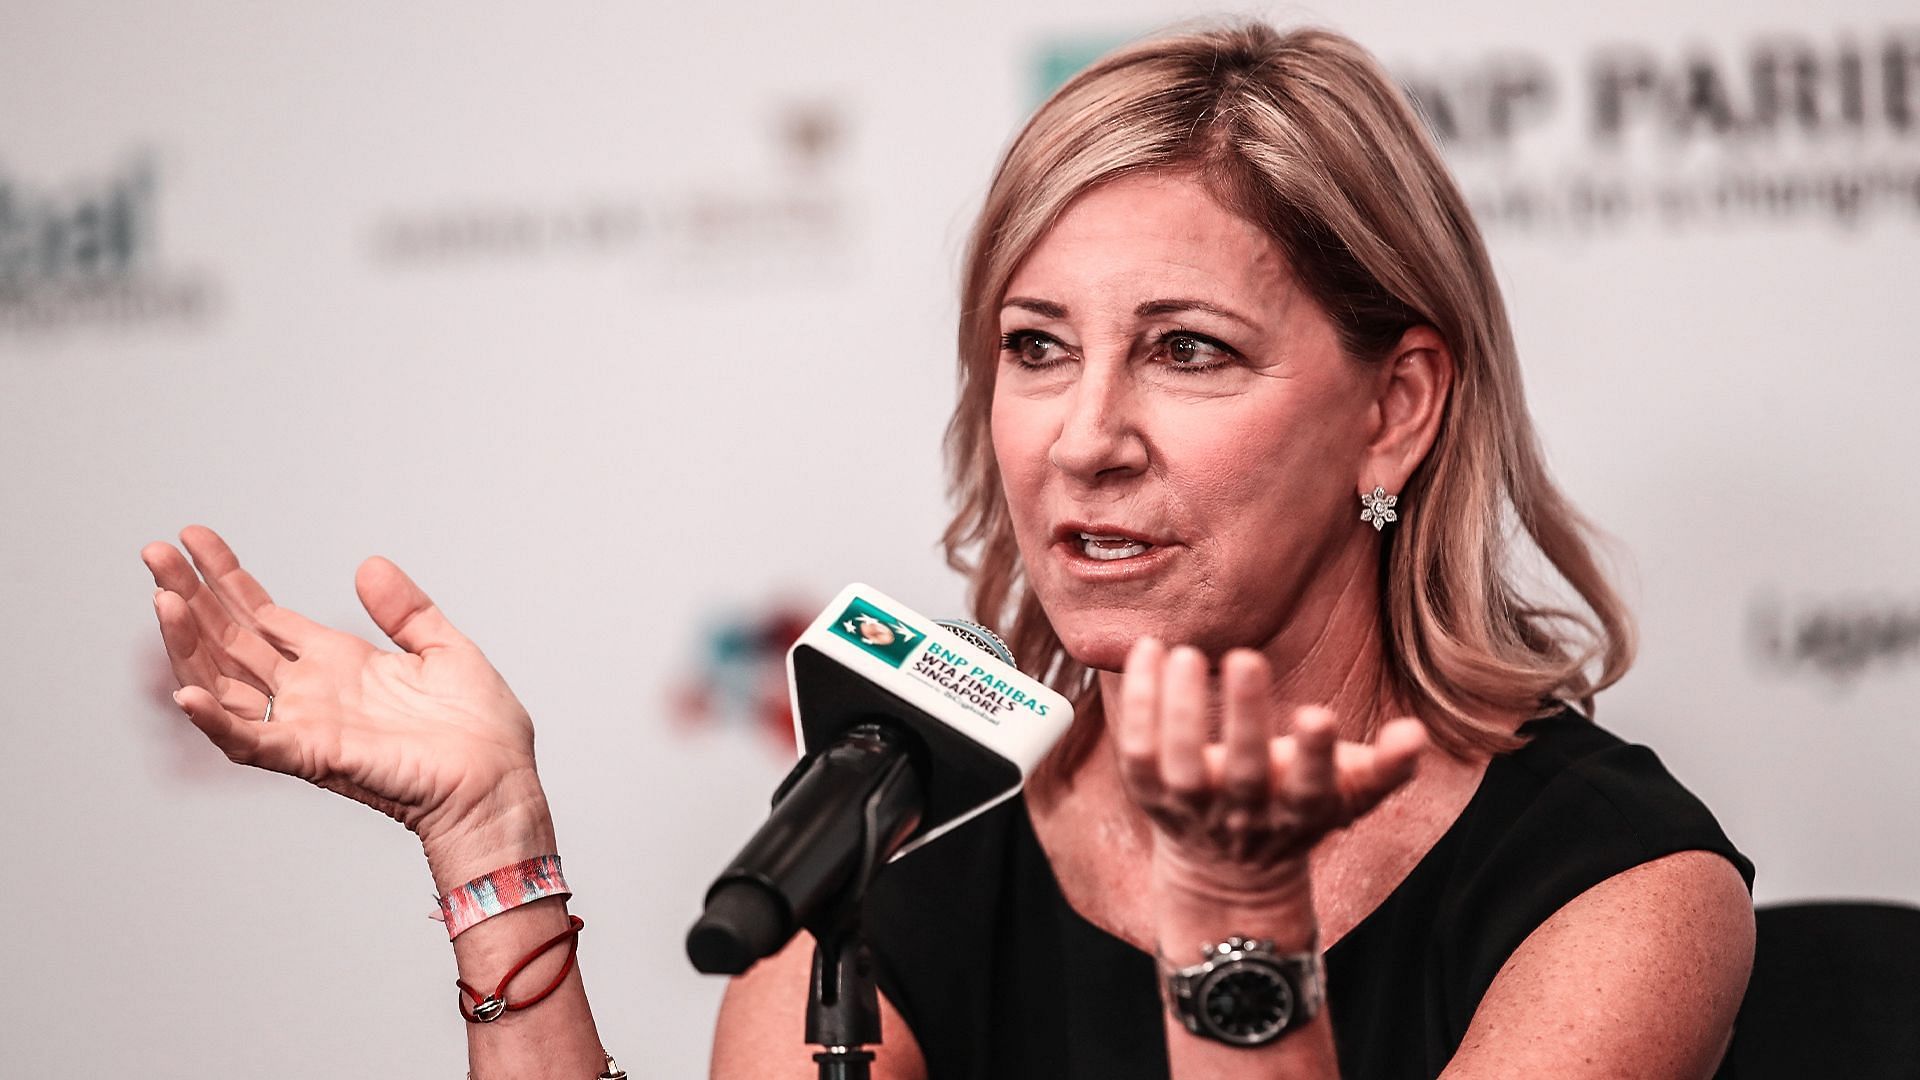 Chris Evert broke stereotypes as she started playing